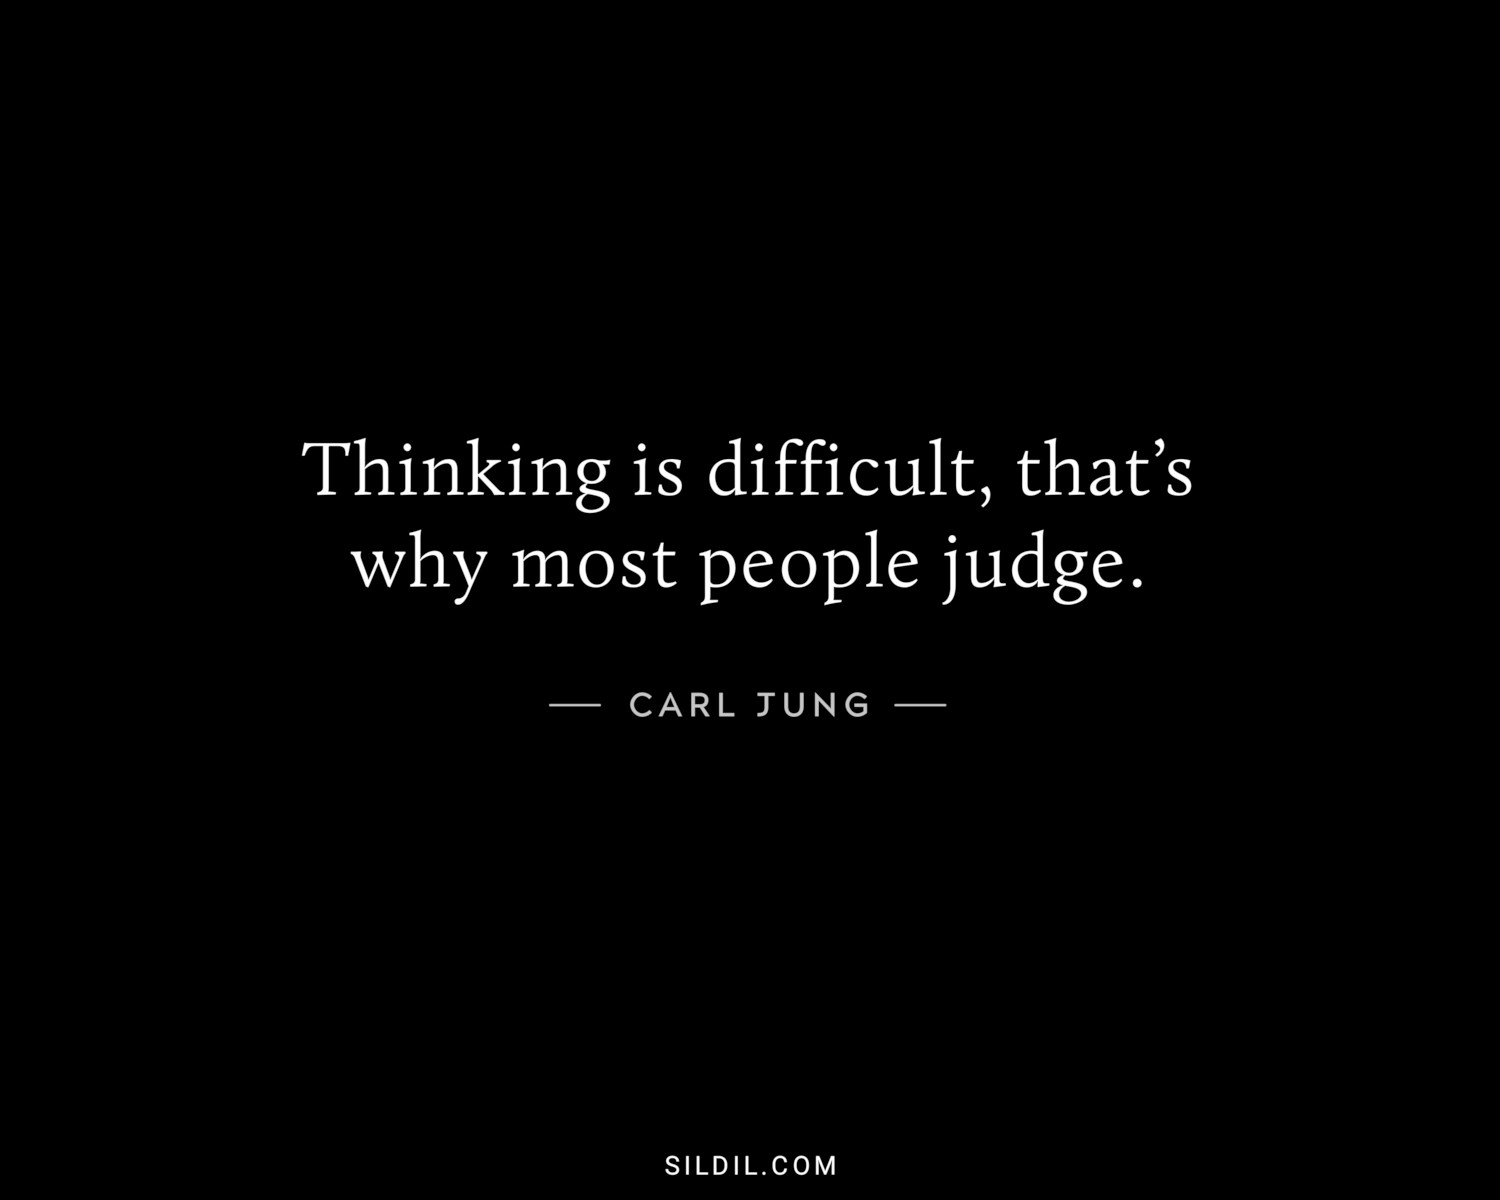 Thinking is difficult, that’s why most people judge.